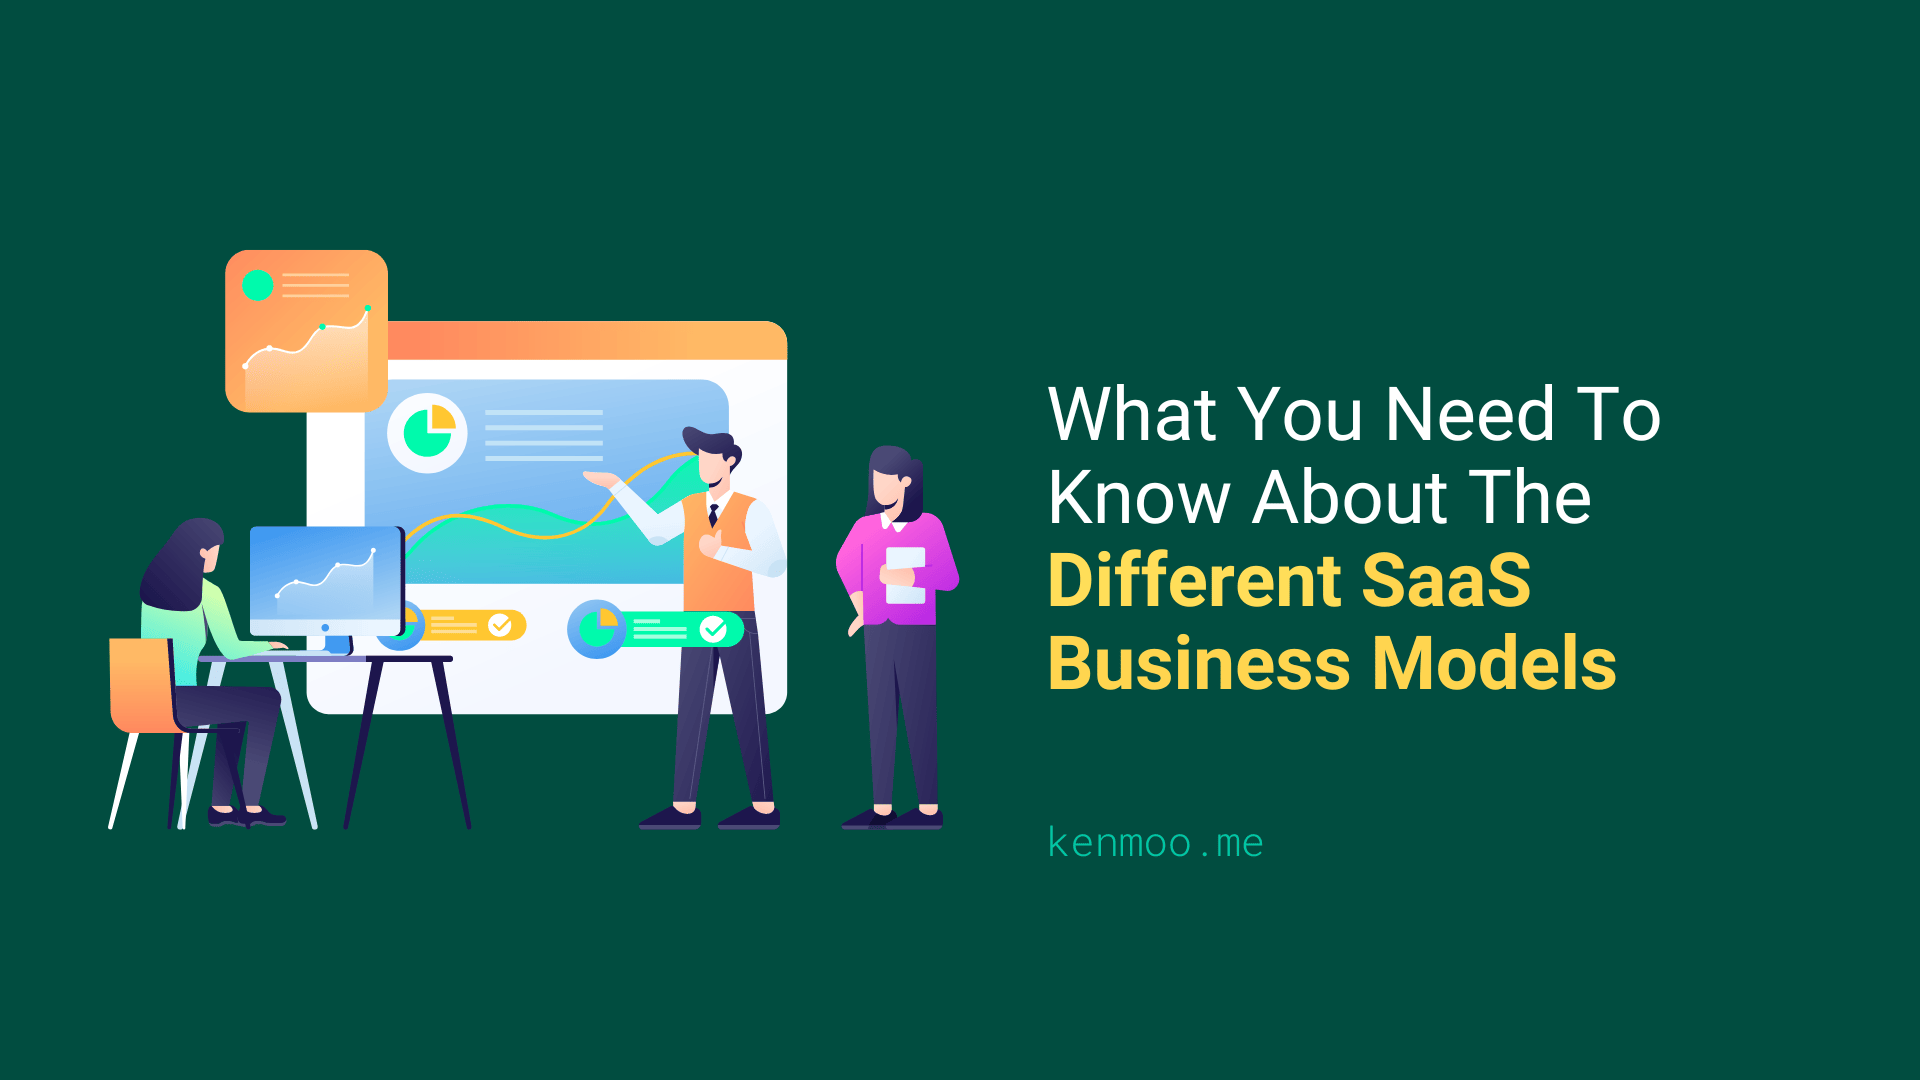 What You Need To Know About The Different SaaS Business Models